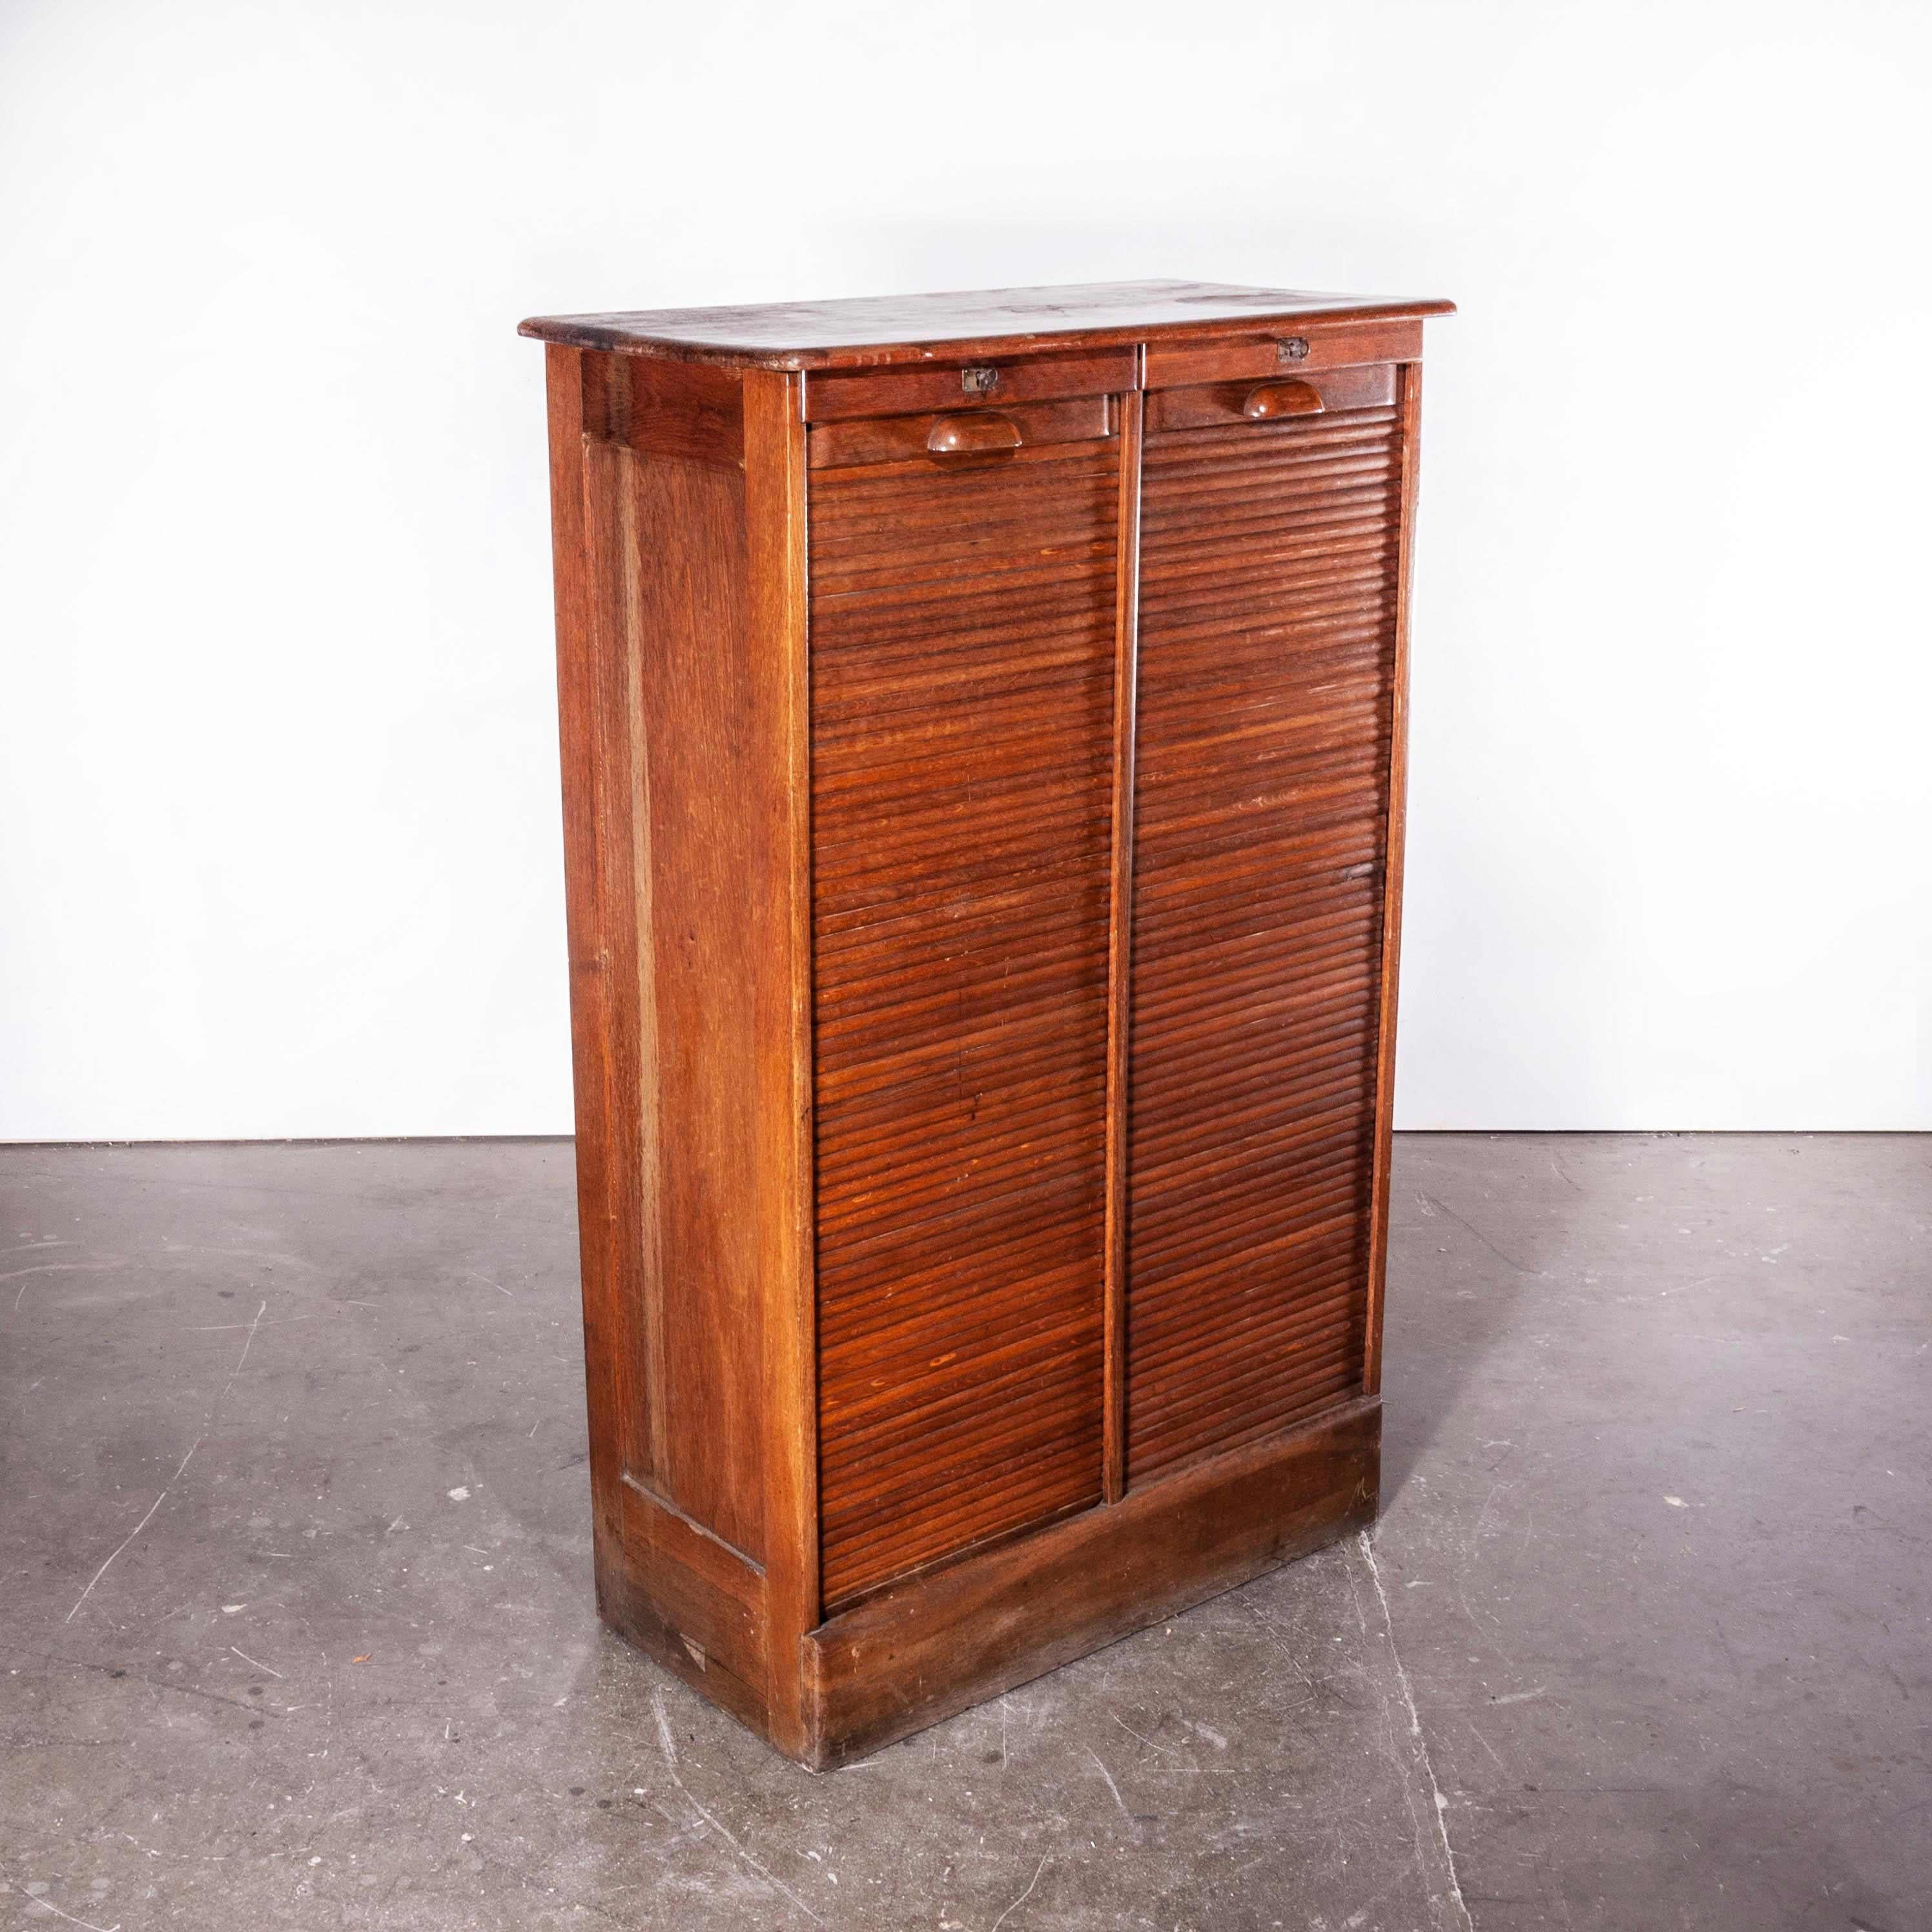 1930s Thonet tambour fronted oak cabinet
1930s Thonet tambour fronted oak cabinet. Founded in the early 19th century by Michael Thonet, Thonet invented the process of steam bending wood under pressure and used this to design the Classic bentwood